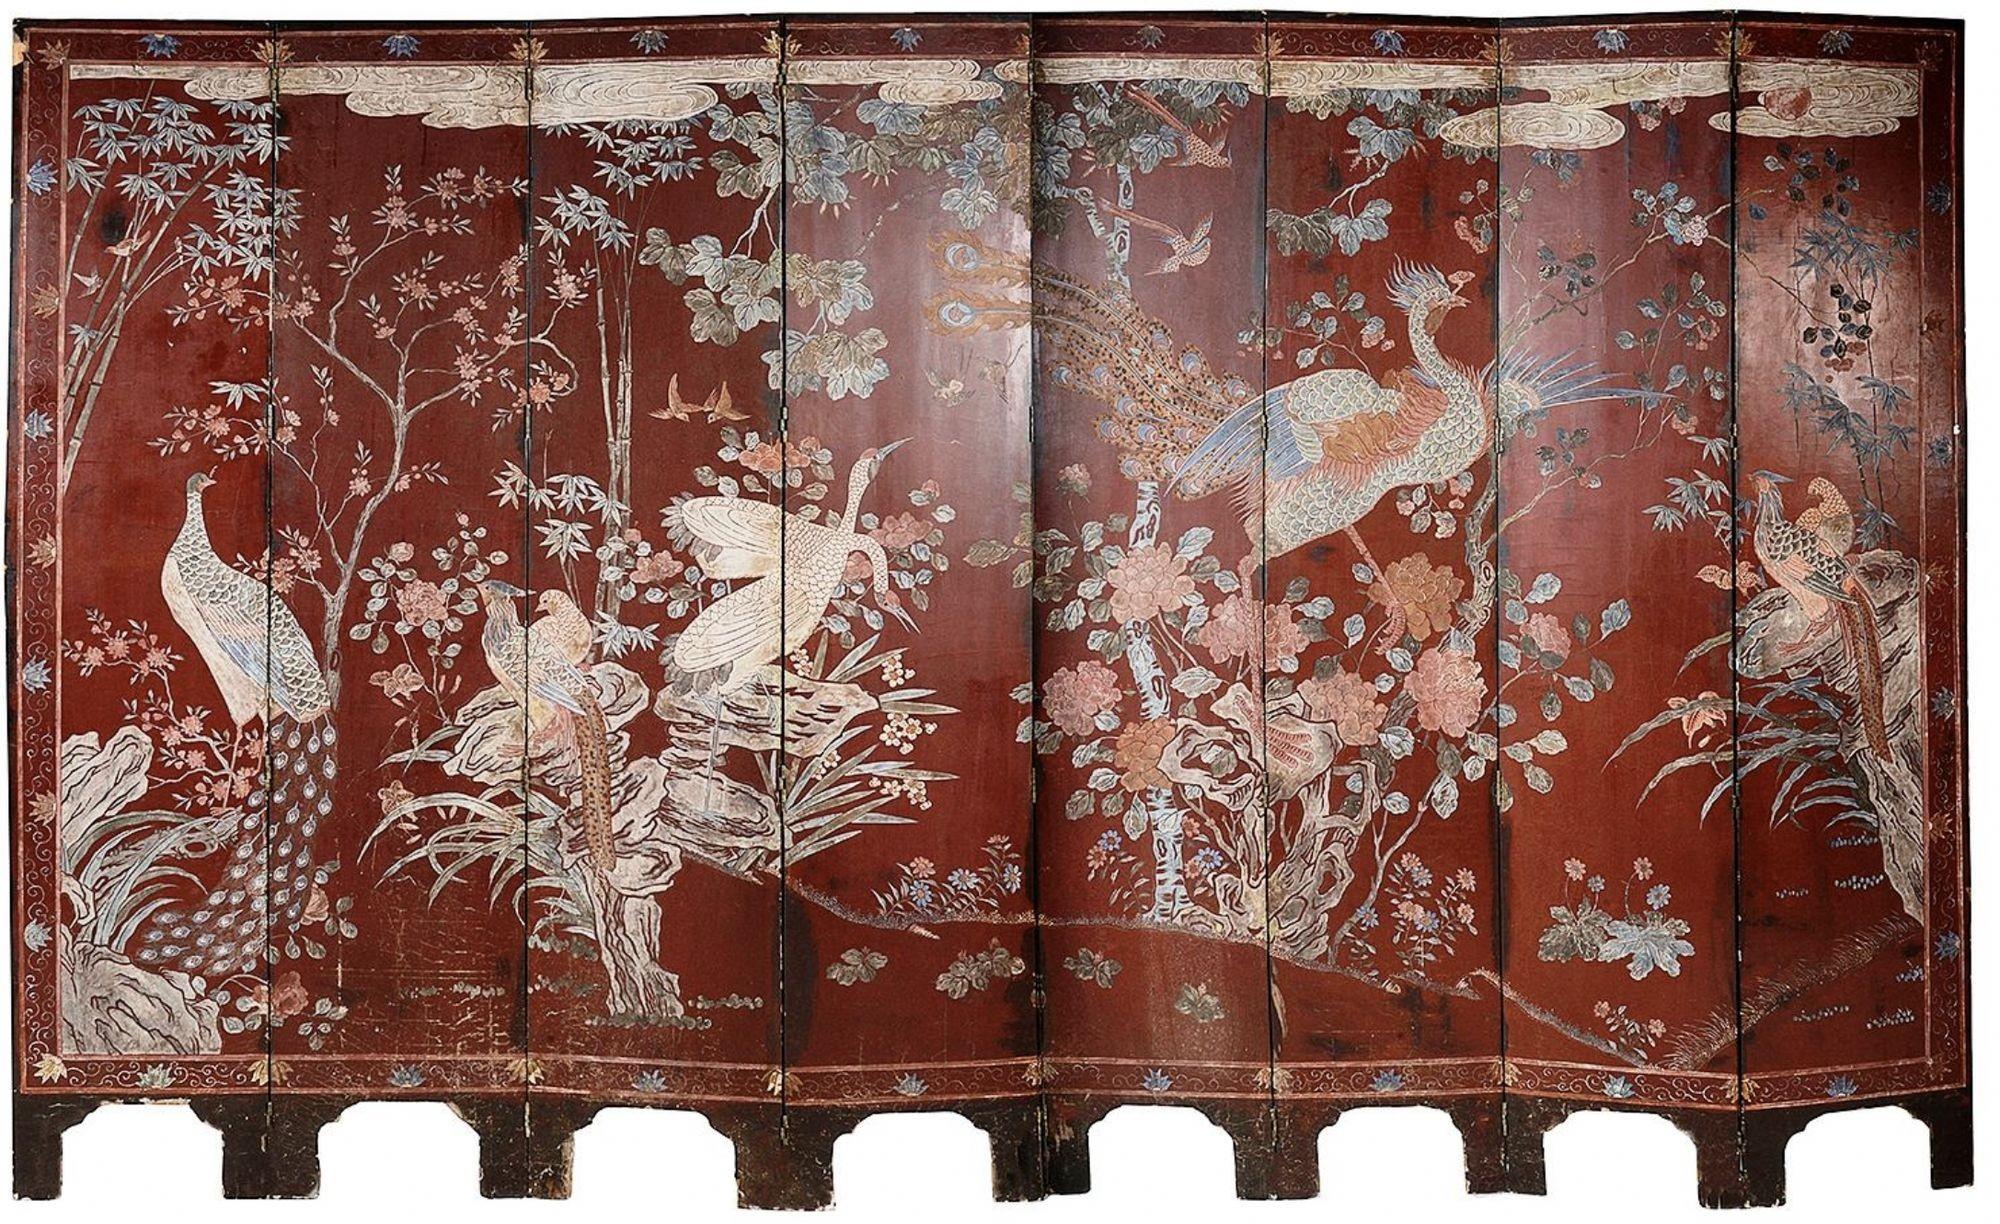 A very impressive early 19th Century Chinese Coromandel lacquer eight fold screen, depicting courtiers and attendants in pagoda buildings and gardens. set in a boarder of flower pots, vases and vessels. The reverse side having an equally decorative